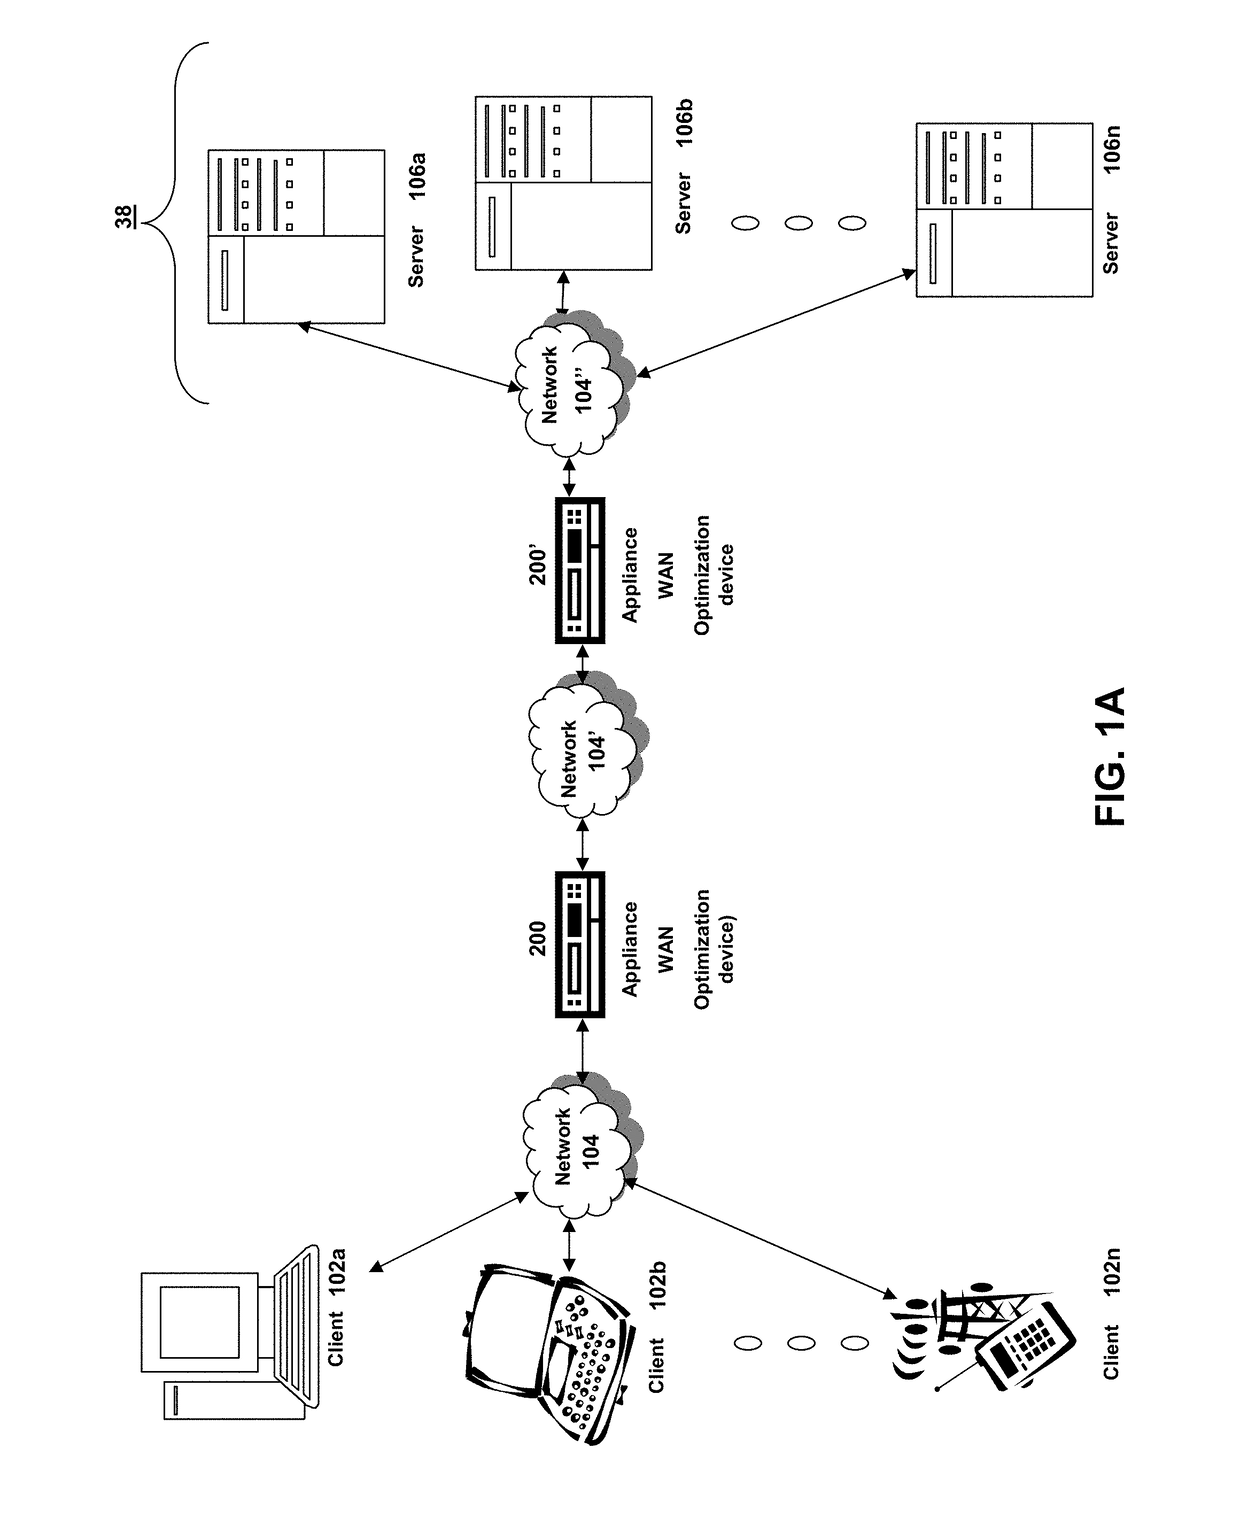 Systems and methods for dynamic adaptation of network accelerators